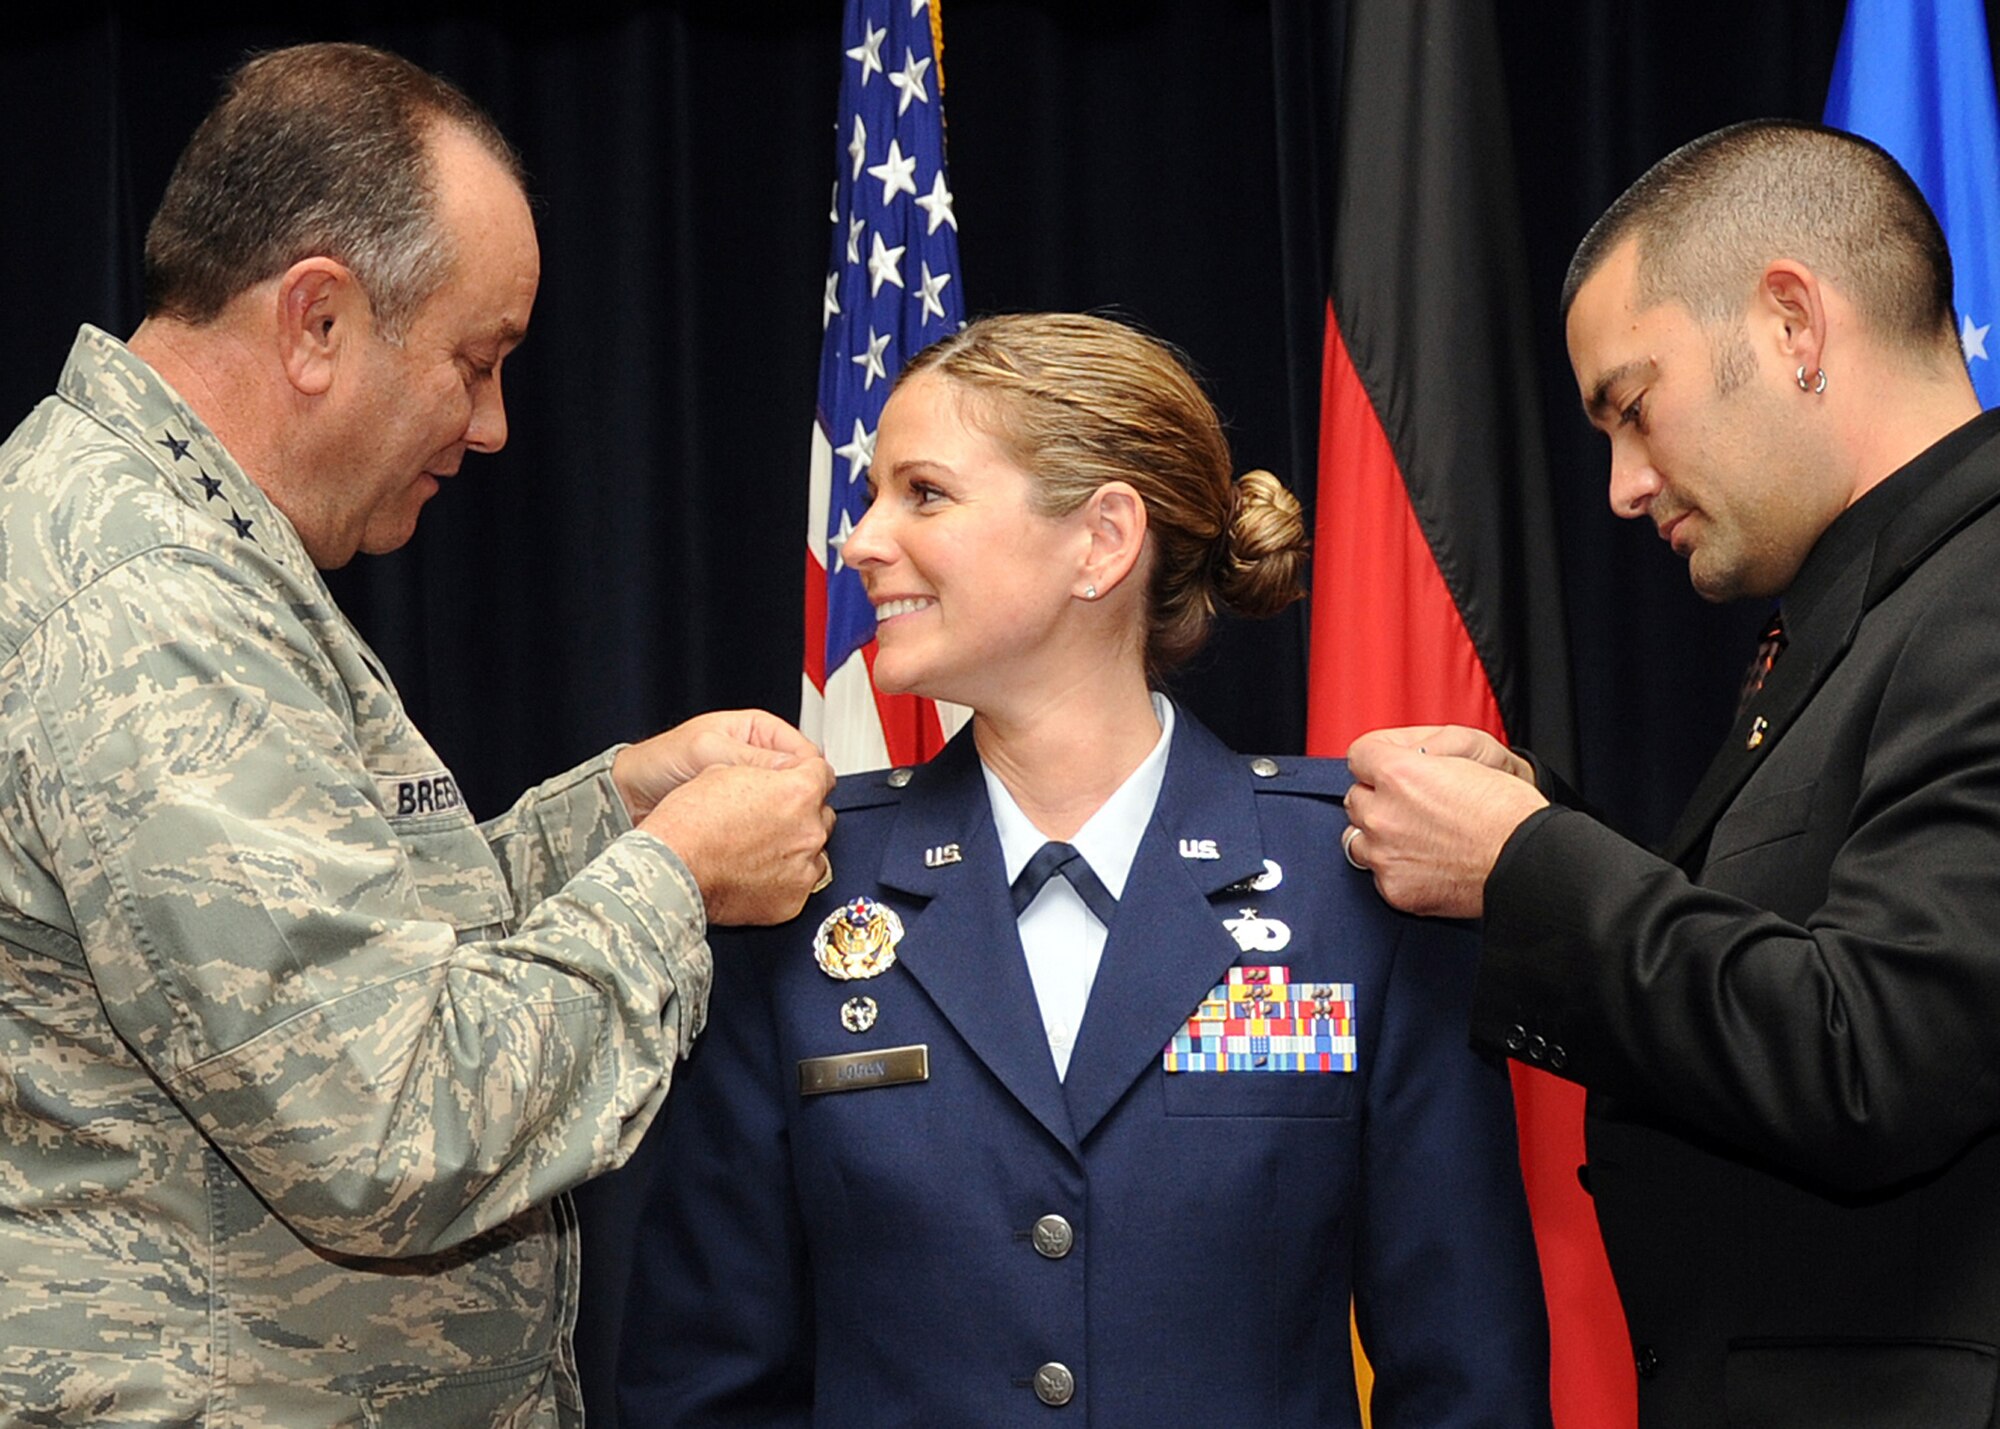 SPANGDAHLEM AIR BASE, Germany – U.S. Air Force Gen. Philip M. Breedlove, U.S. Air Forces in Europe commander and native of Austin, Texas, pins lieutenant colonel rank onto U.S. Air Force Maj. Cat Logan, 52nd Force Support Squadron commander and native of Henderson N.C., during her ceremonial pin-on at Club Eifel Oct. 31, 2012. Logan previously worked with Breedlove in the Pentagon and now uses his positive attitude as an outline of how she leads her squadron today. (U.S. Air Force photo by Staff Sgt. Daryl Knee/Released)